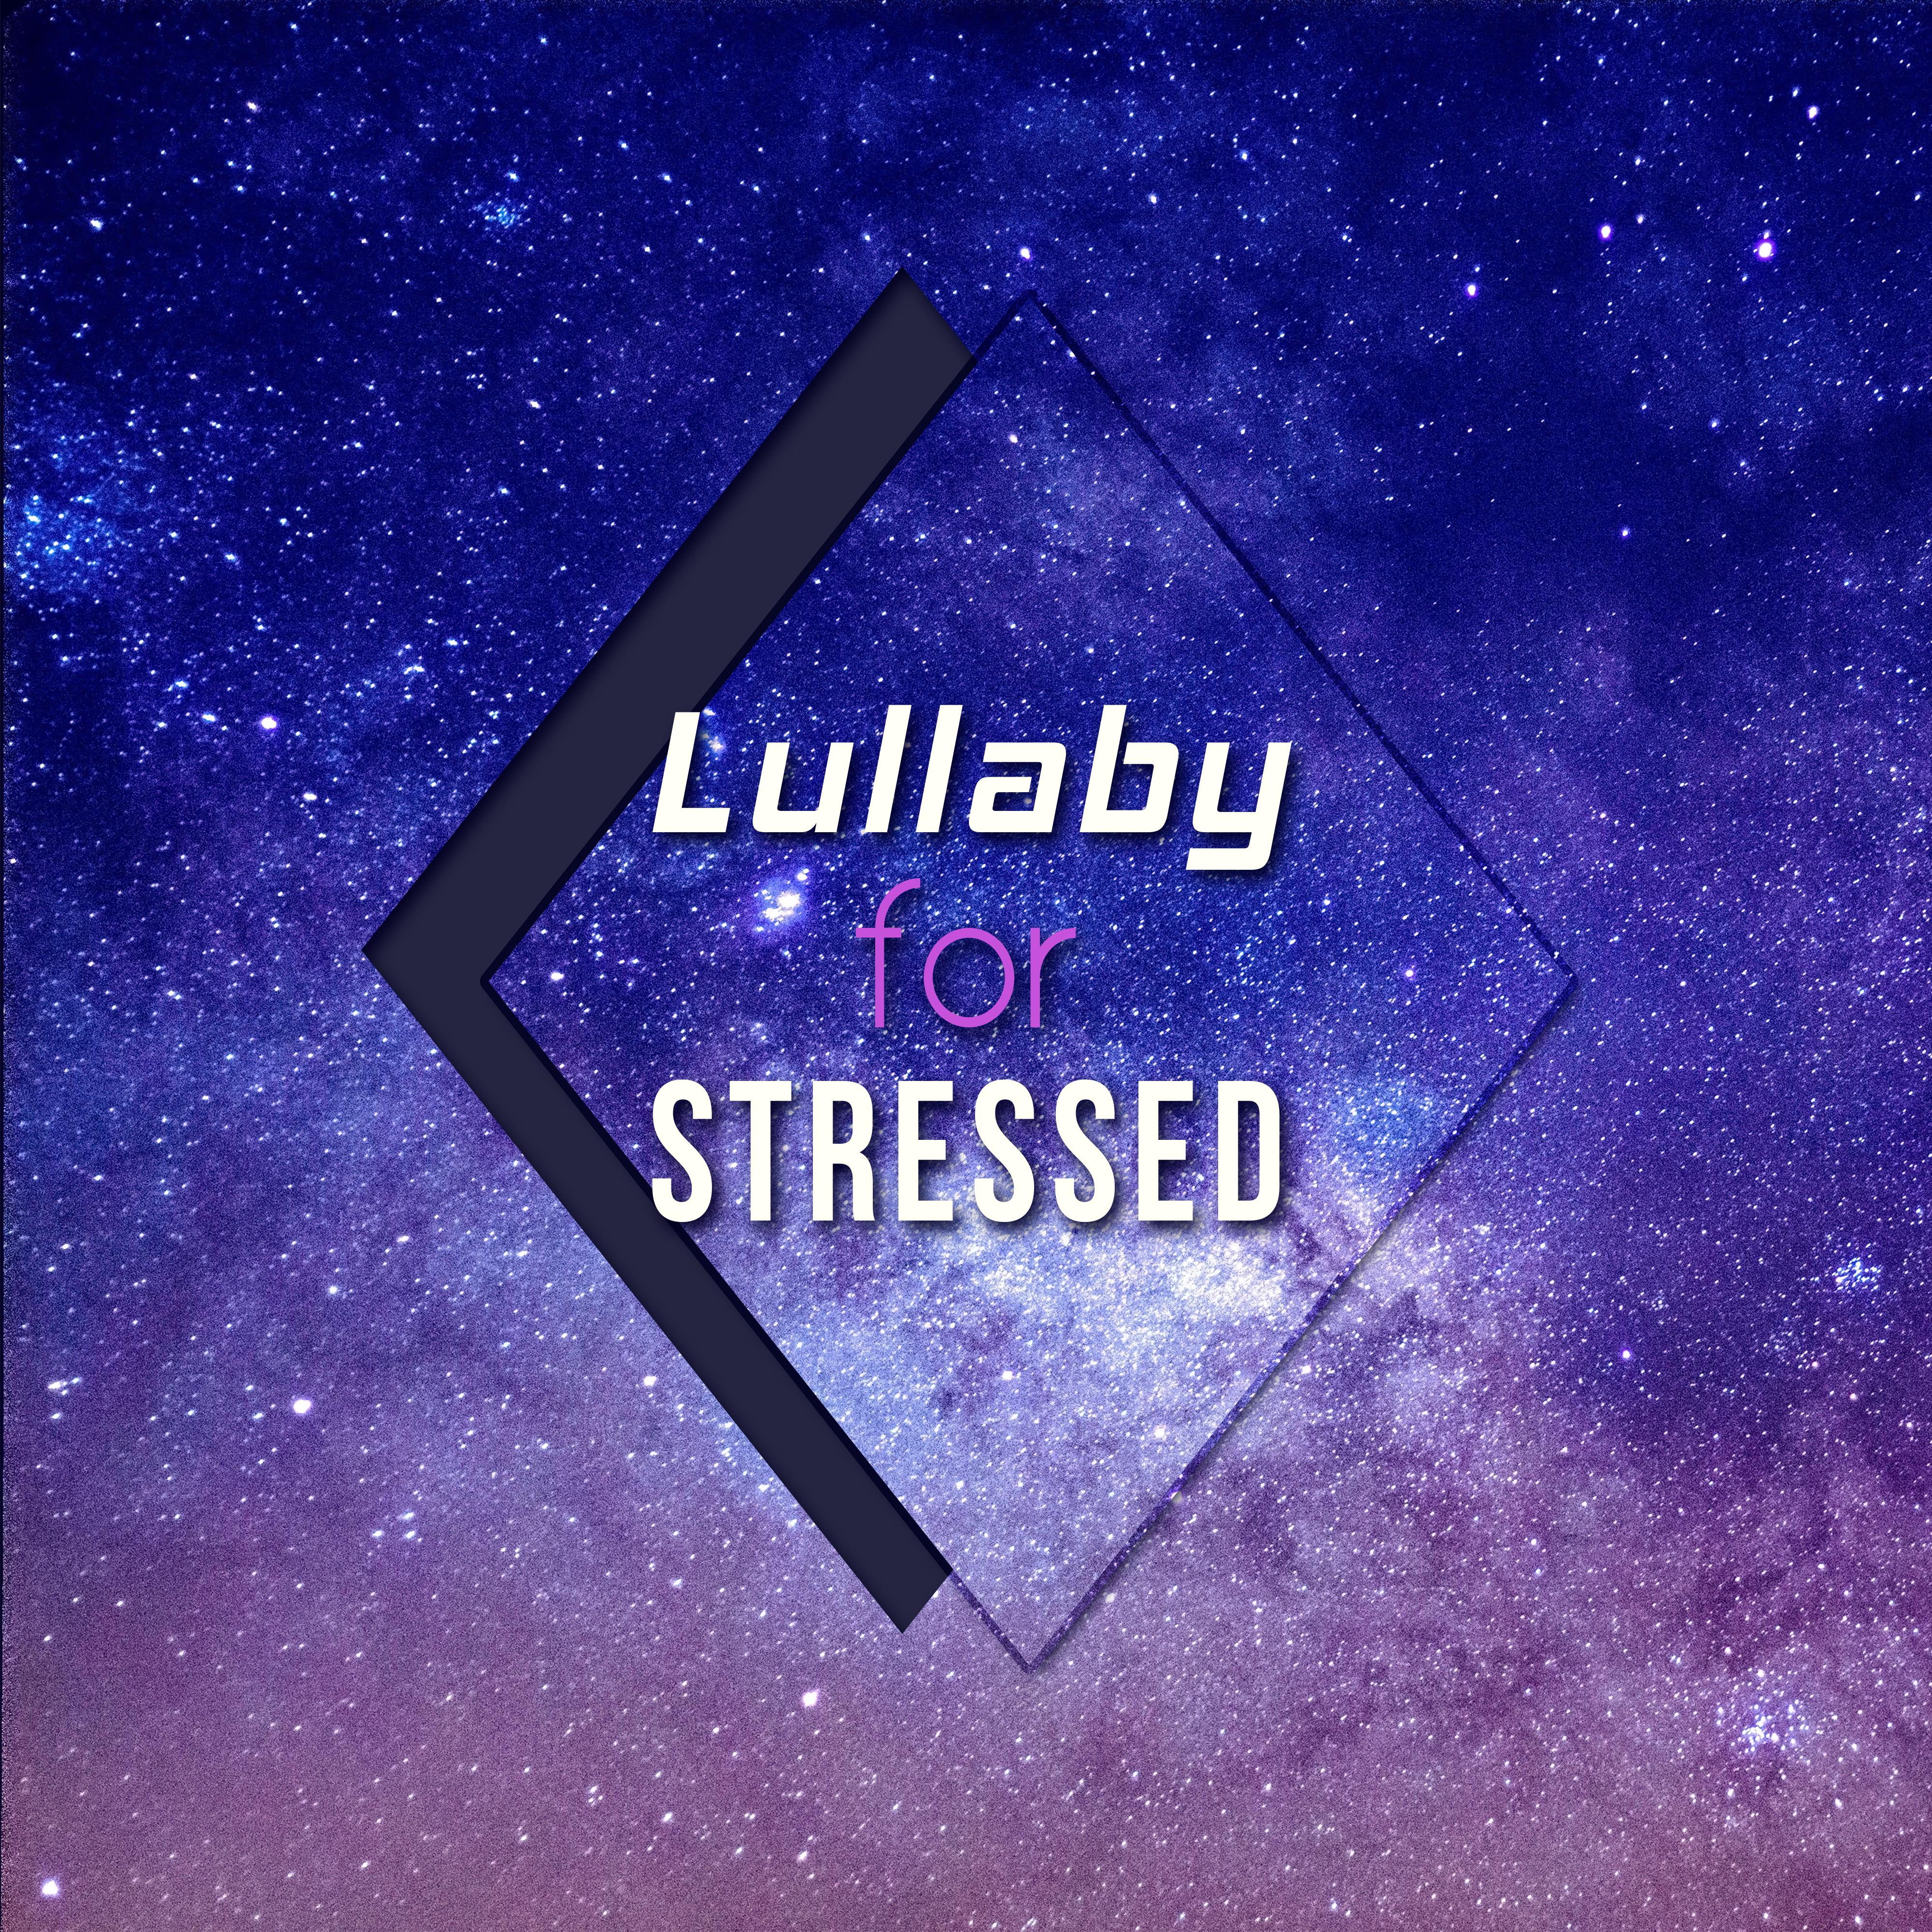 Lullaby for Stressed  Cradlesong, Silent Song, Berceuse, Slow Music